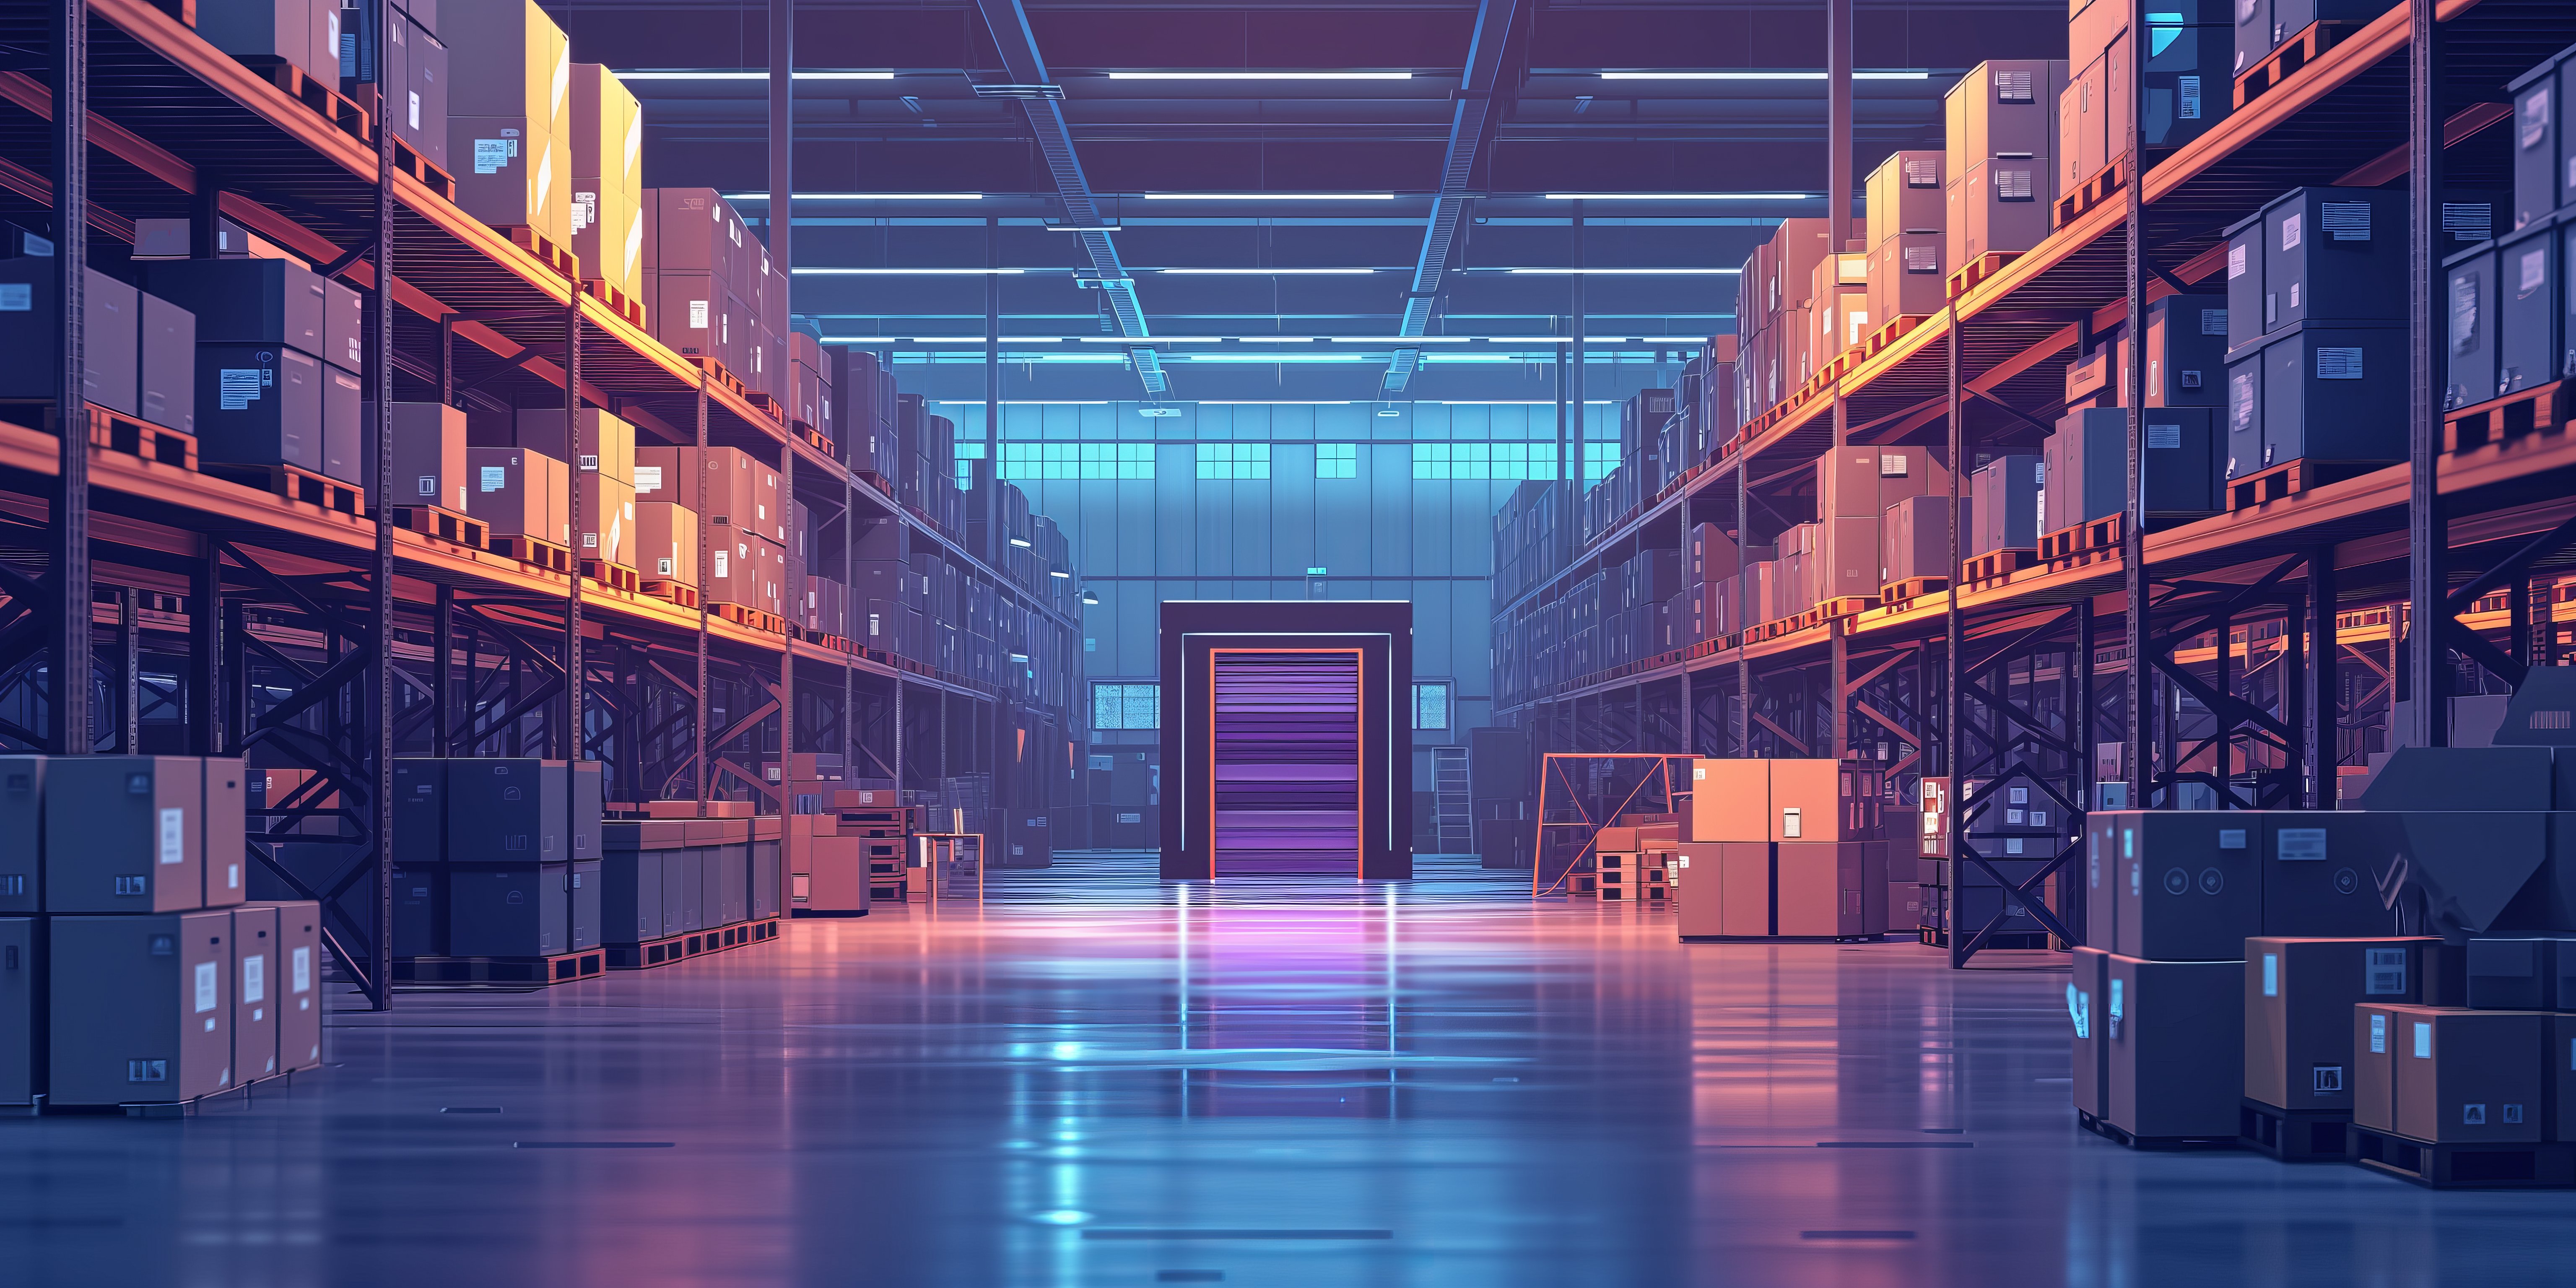 neonlit-futuristic-warehouse-aisle-with-packed-shelves